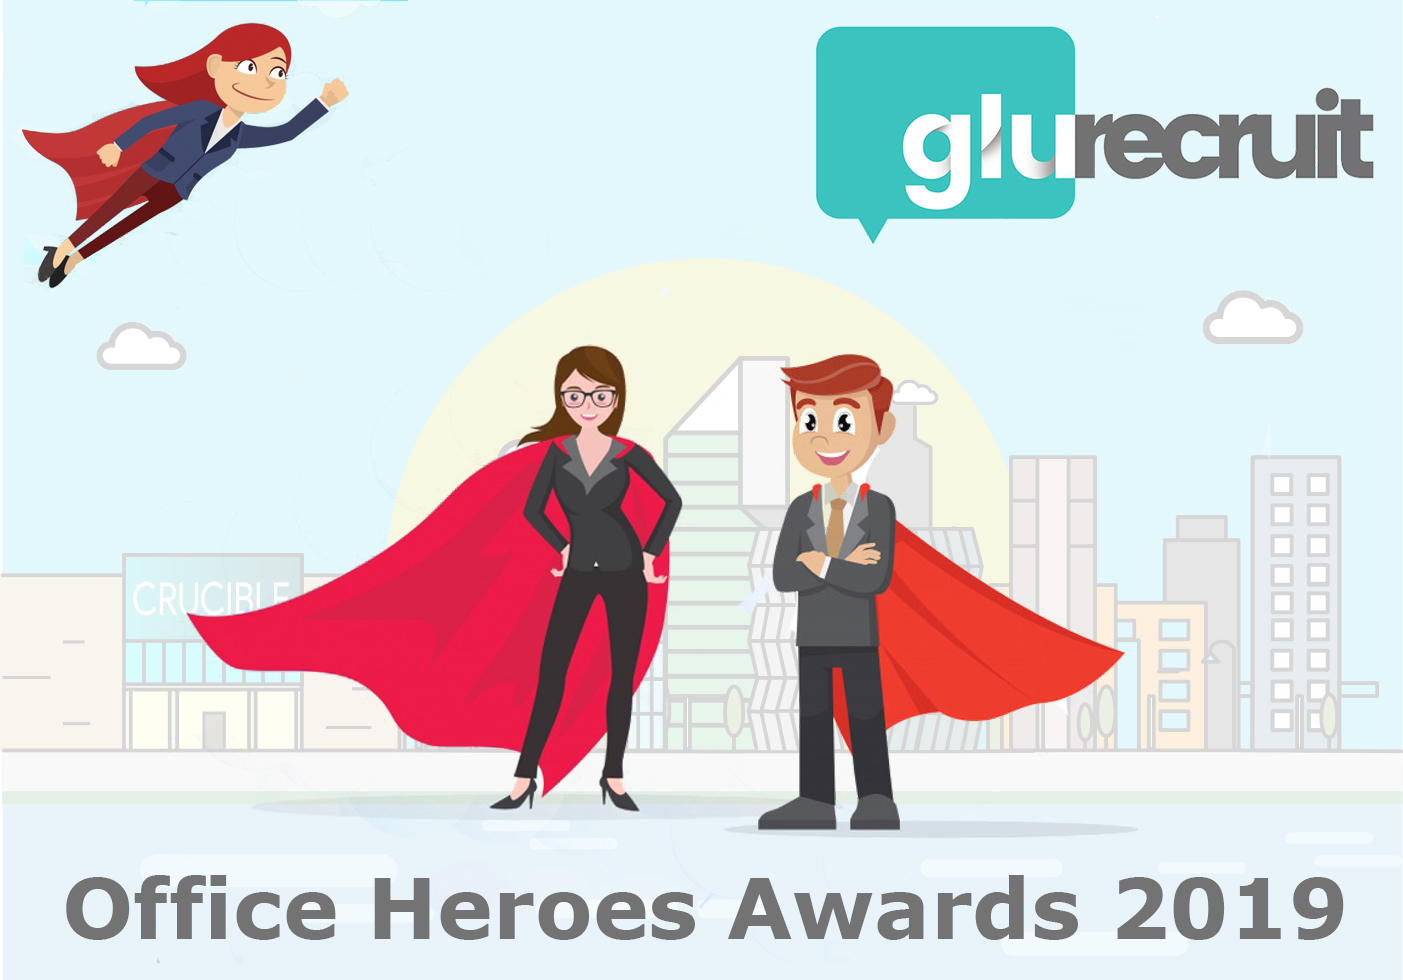 Shortlist announced for the 2019 Office Heroes Awards